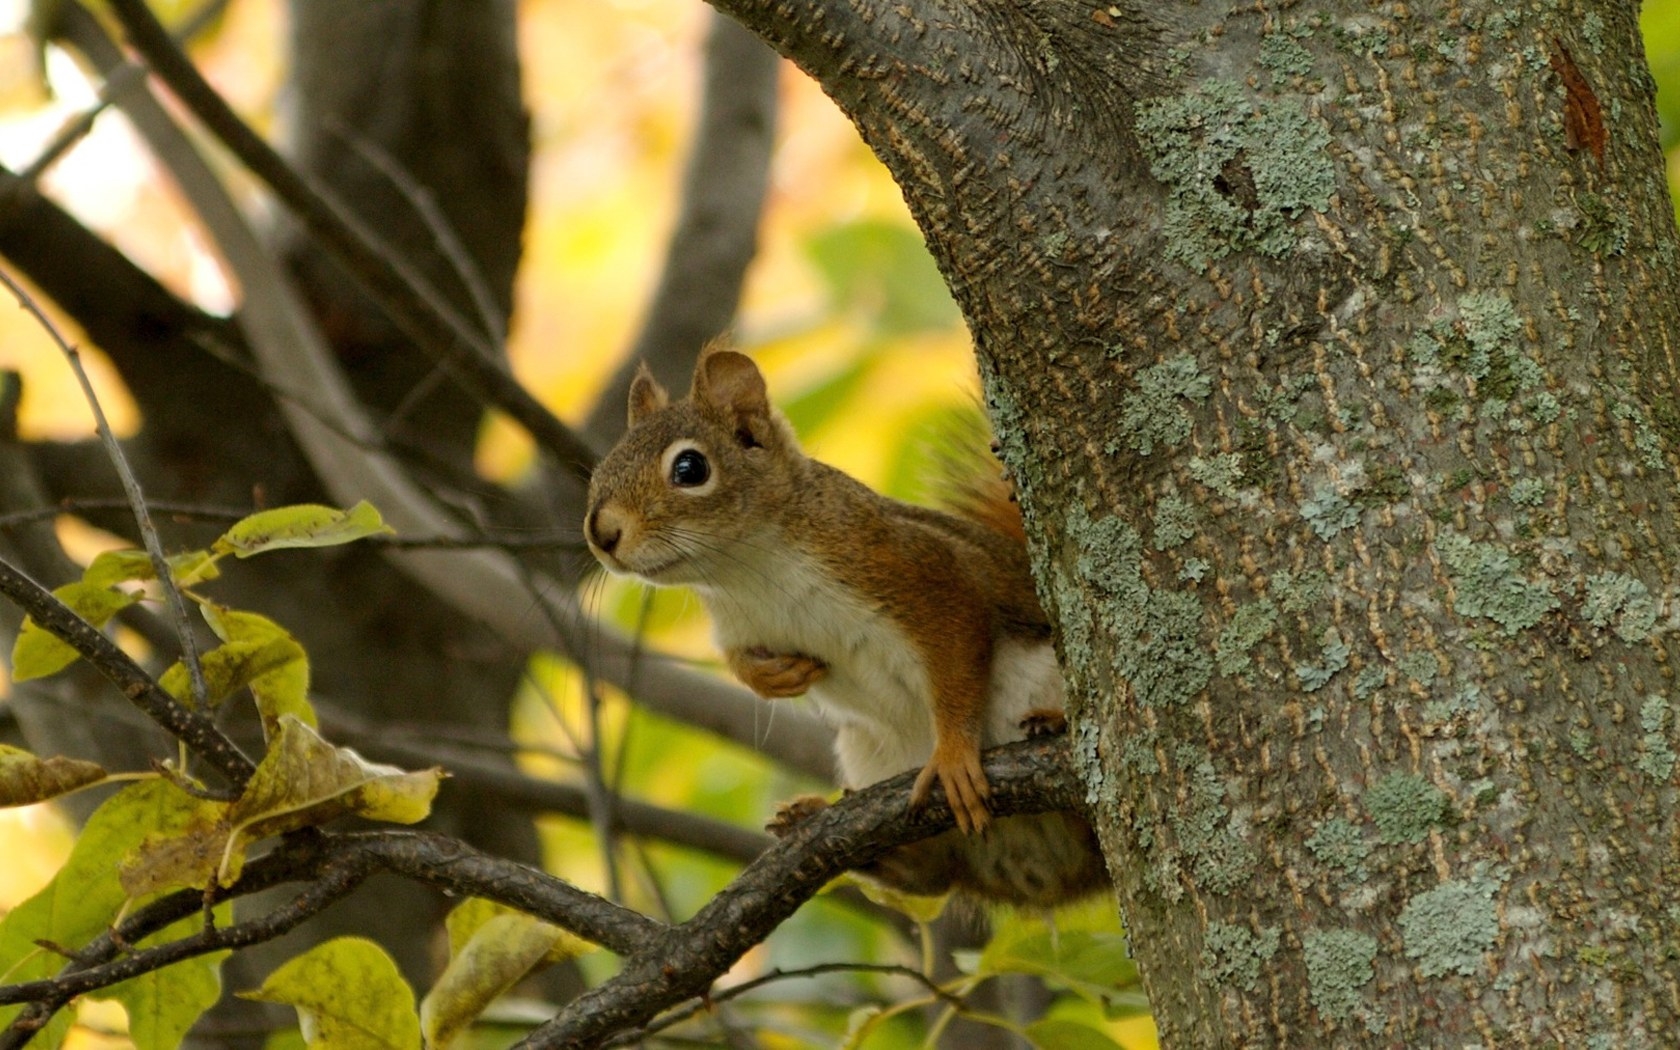  Squirrel HD Android Wallpapers